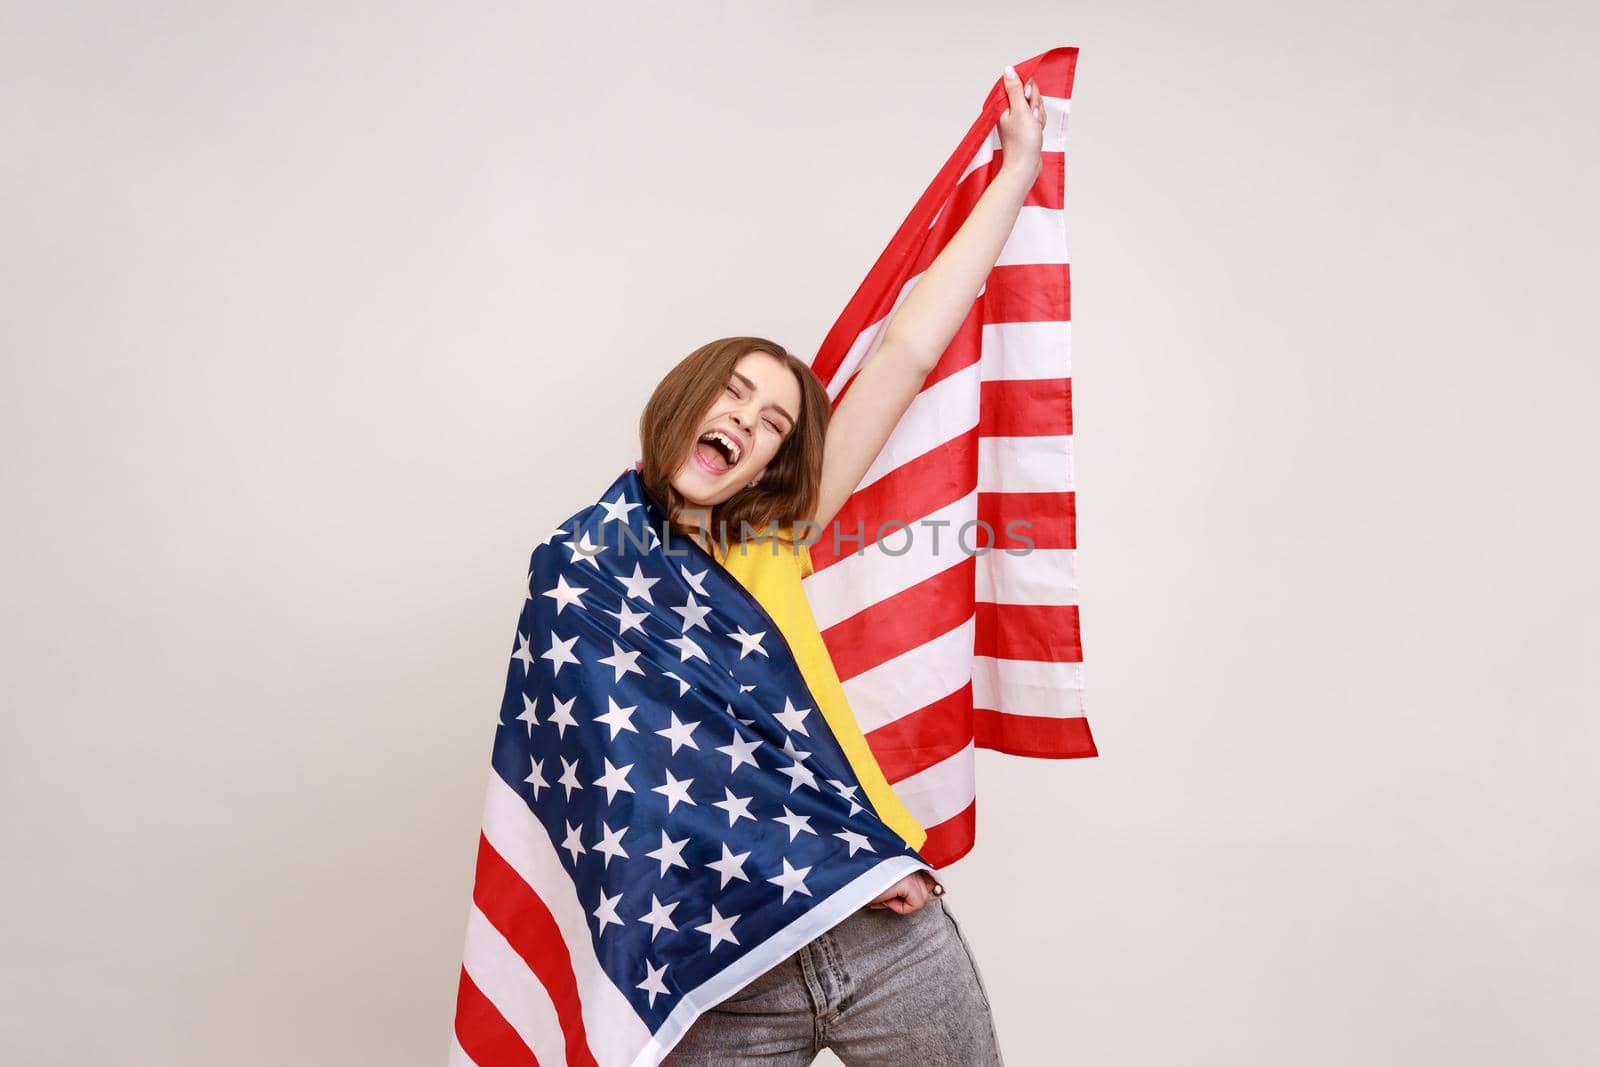 Charming pretty teenager girl with wavy hair, wrapping American flag, yelling happily, raising had up, celebrating Independence day. Indoor studio shot isolated on gray background.